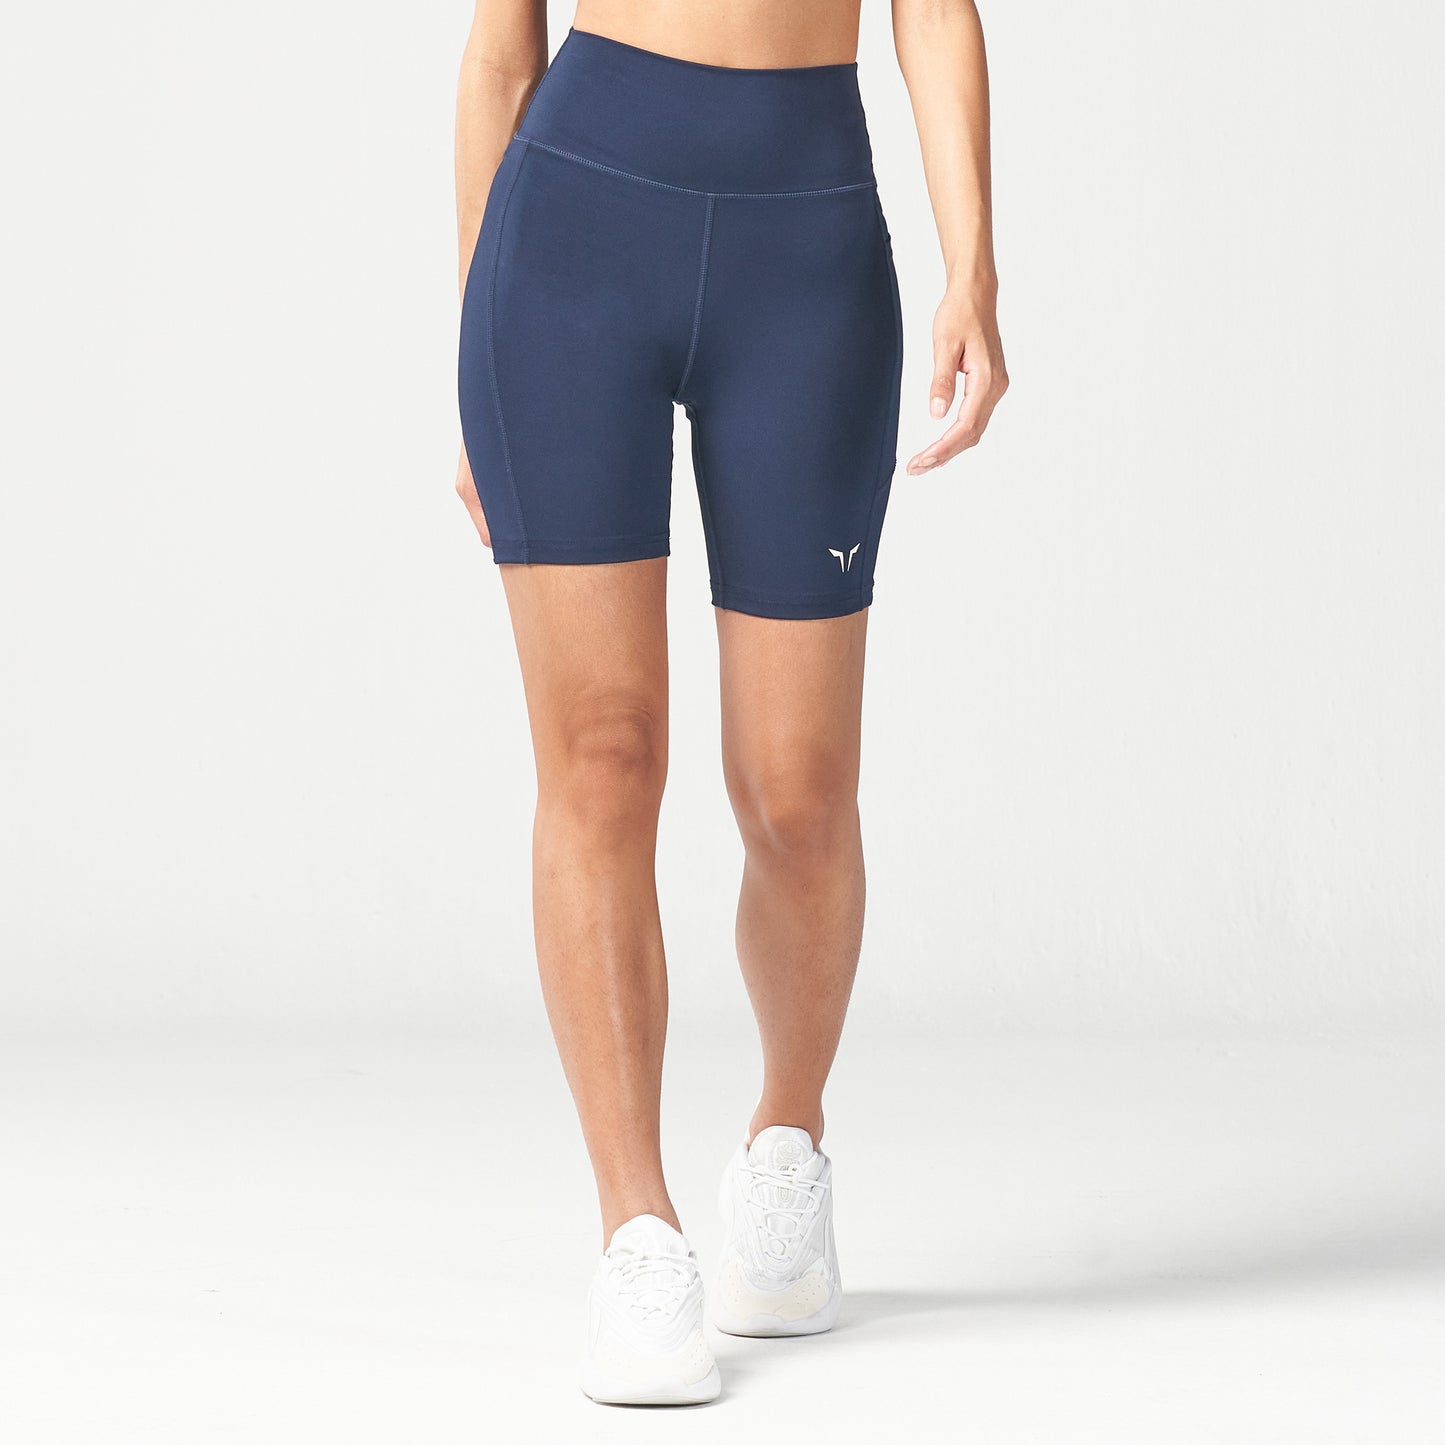 AE | Essential 7'' Cycling Short - Navy | Workout Shorts Women | SQUATWOLF